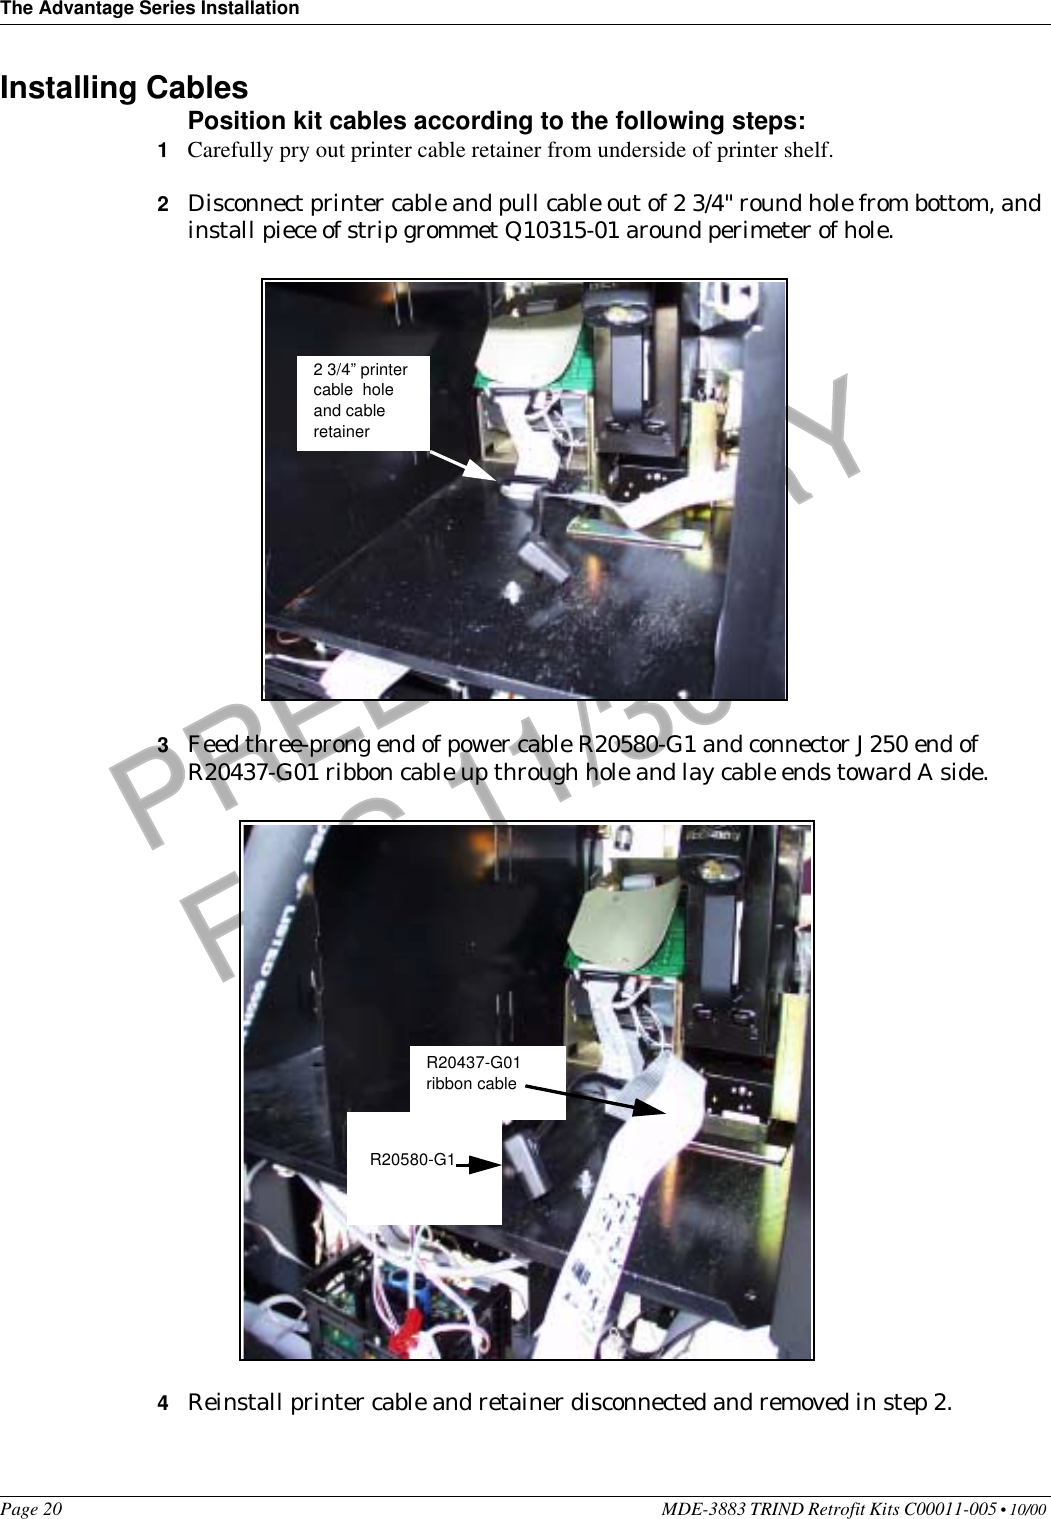 The Advantage Series InstallationPage 20 MDE-3883 TRIND Retrofit Kits C00011-005 • 10/00 PRELIMINARYFCC 11/30Installing CablesPosition kit cables according to the following steps:1Carefully pry out printer cable retainer from underside of printer shelf.2Disconnect printer cable and pull cable out of 2 3/4&quot; round hole from bottom, and install piece of strip grommet Q10315-01 around perimeter of hole.3Feed three-prong end of power cable R20580-G1 and connector J250 end of R20437-G01 ribbon cable up through hole and lay cable ends toward A side.4Reinstall printer cable and retainer disconnected and removed in step 2.2 3/4” printer cable  hole and cable retainerR20580-G1R20437-G01ribbon cable